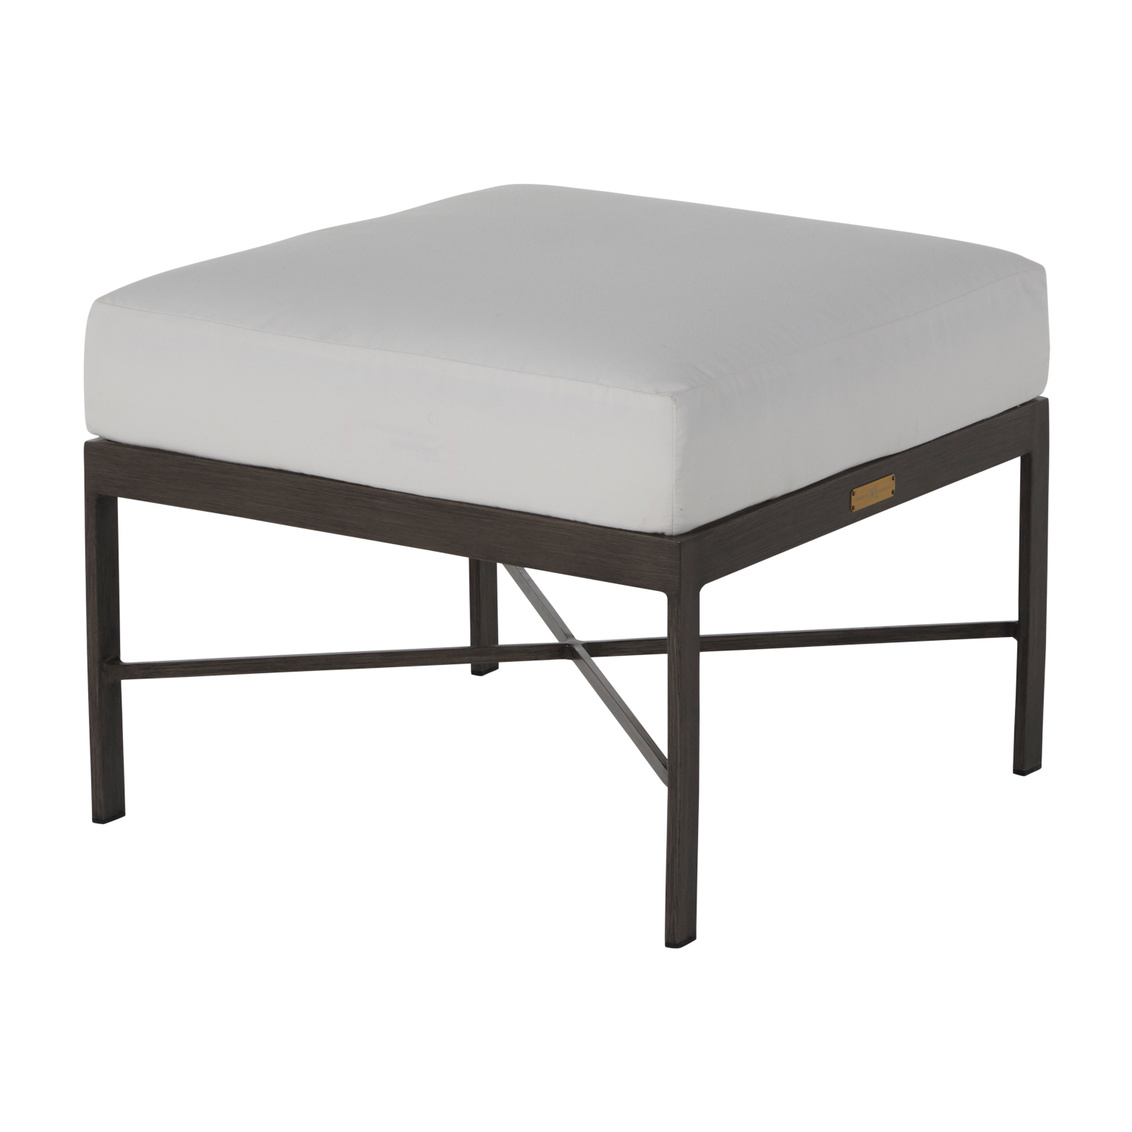 monaco aluminum ottoman in slate grey – frame only product image